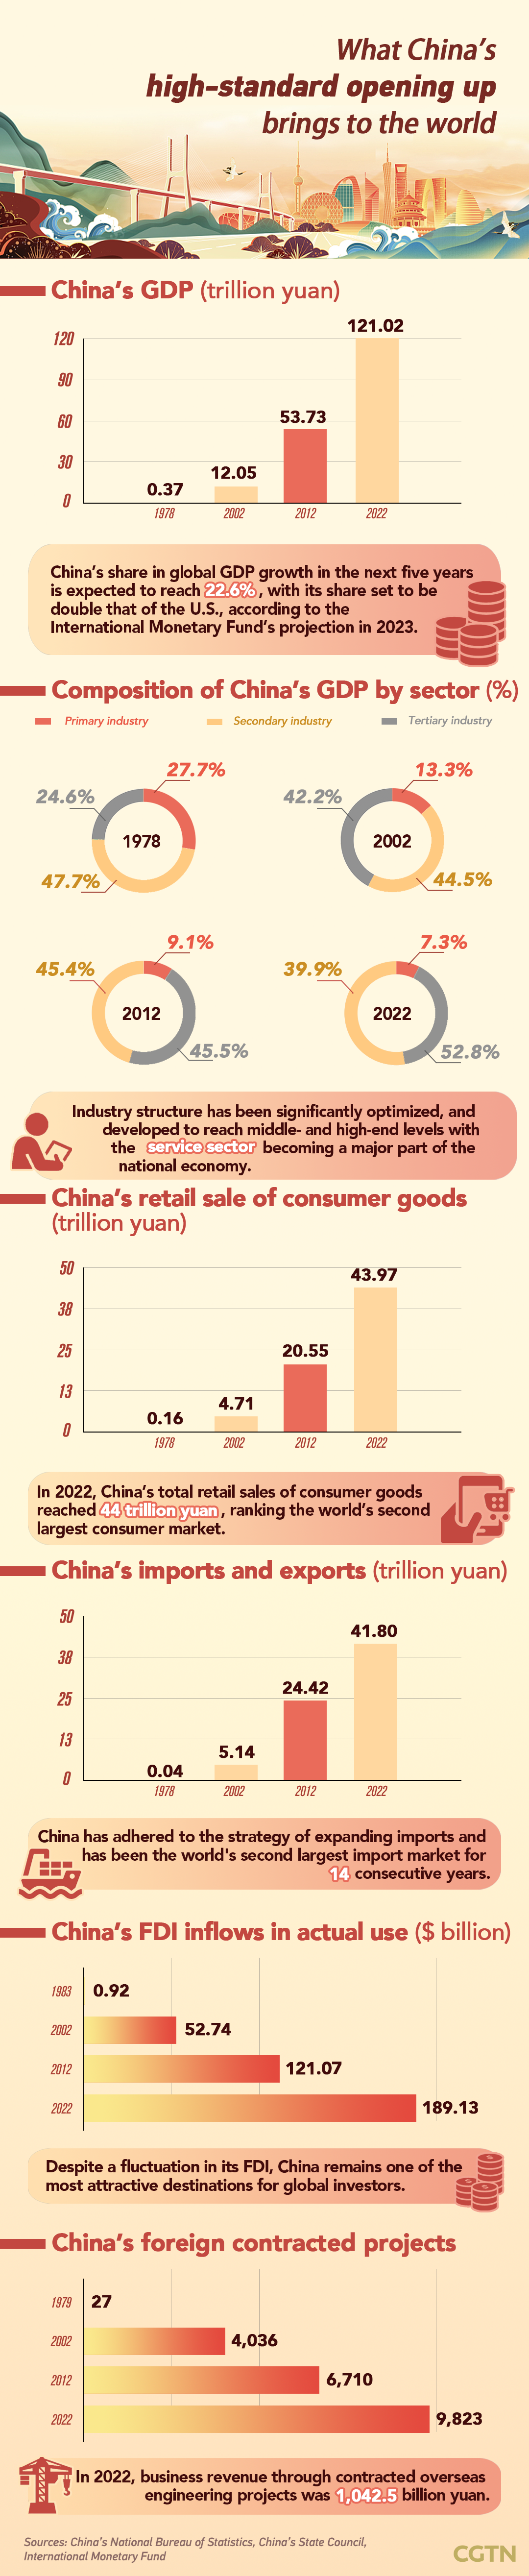 Graphics: What China's high-standard opening up brings to the world